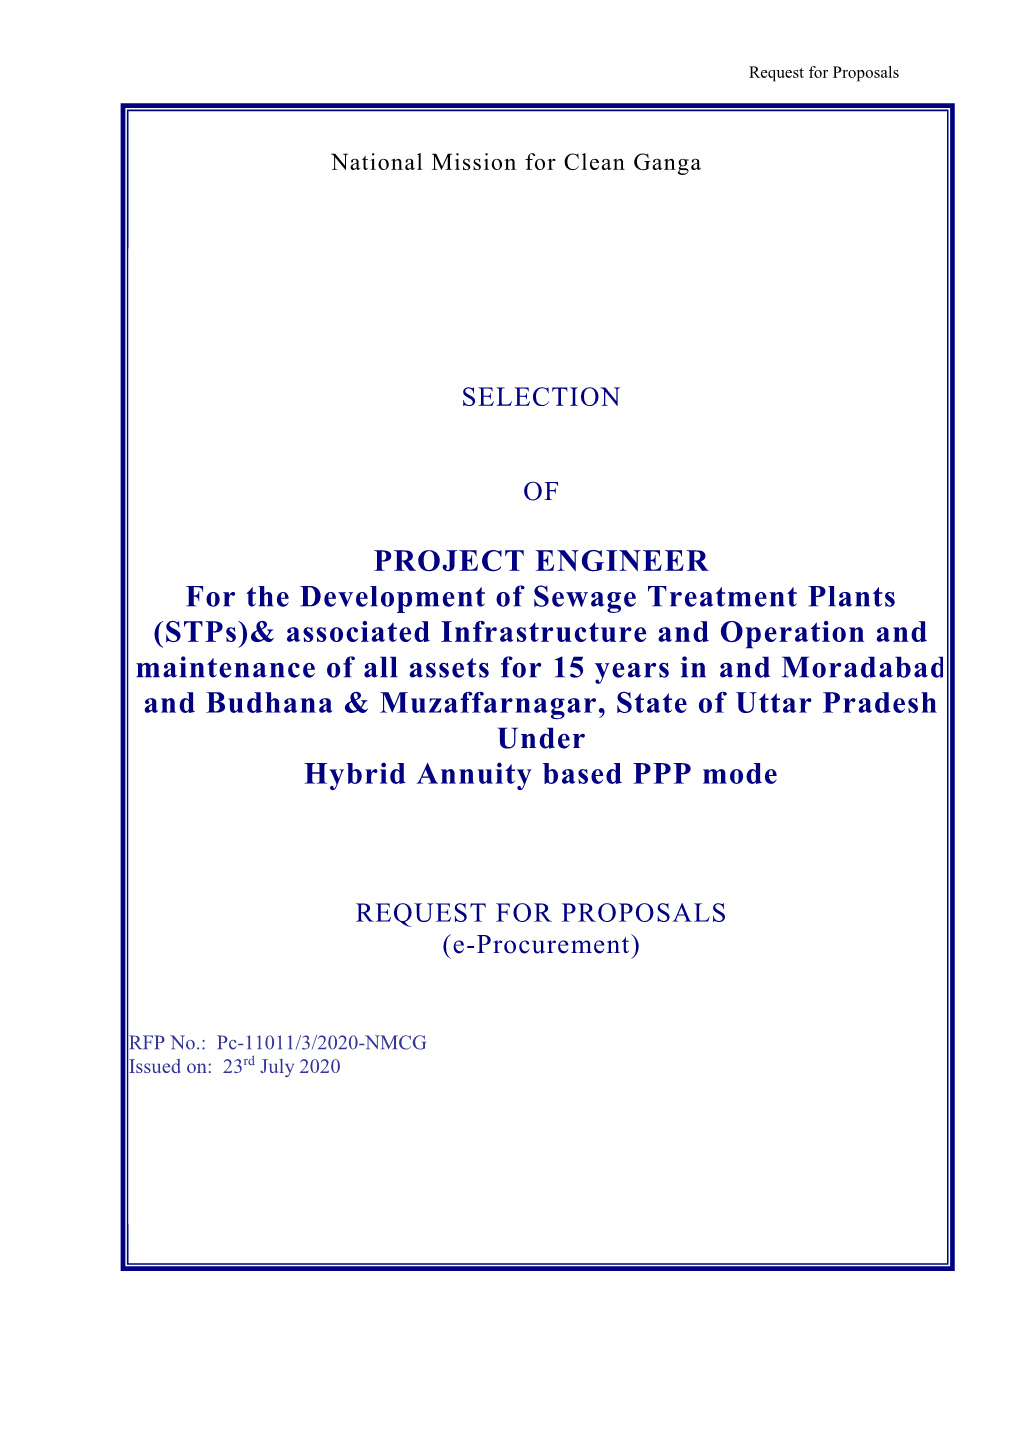 PROJECT ENGINEER for the Development of Sewage Treatment